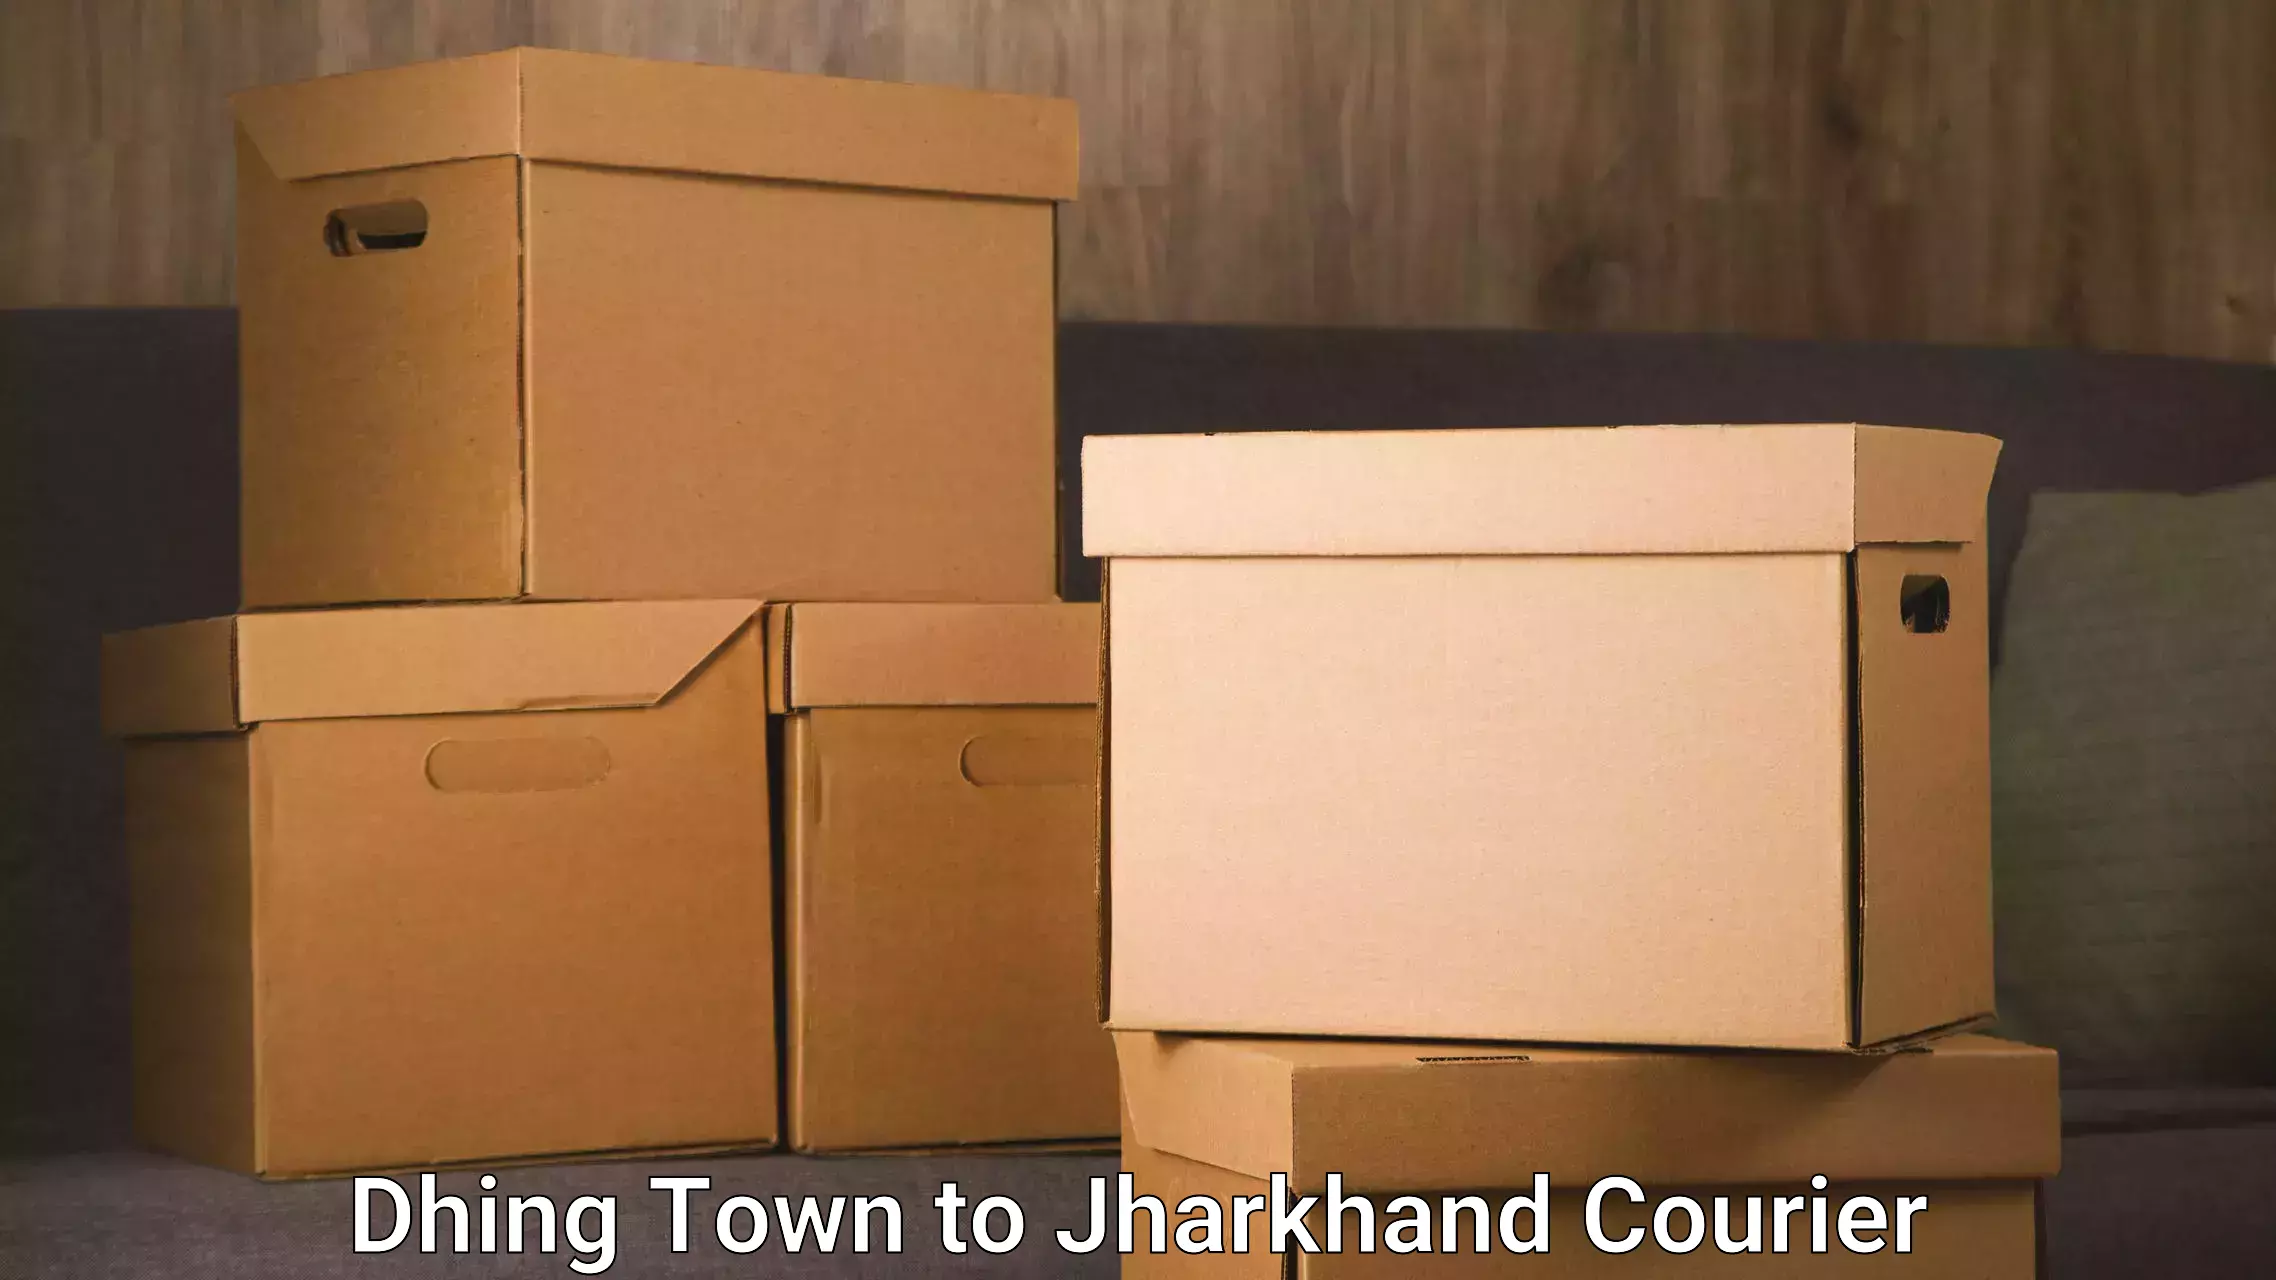 Customer-centric shipping Dhing Town to Jharkhand